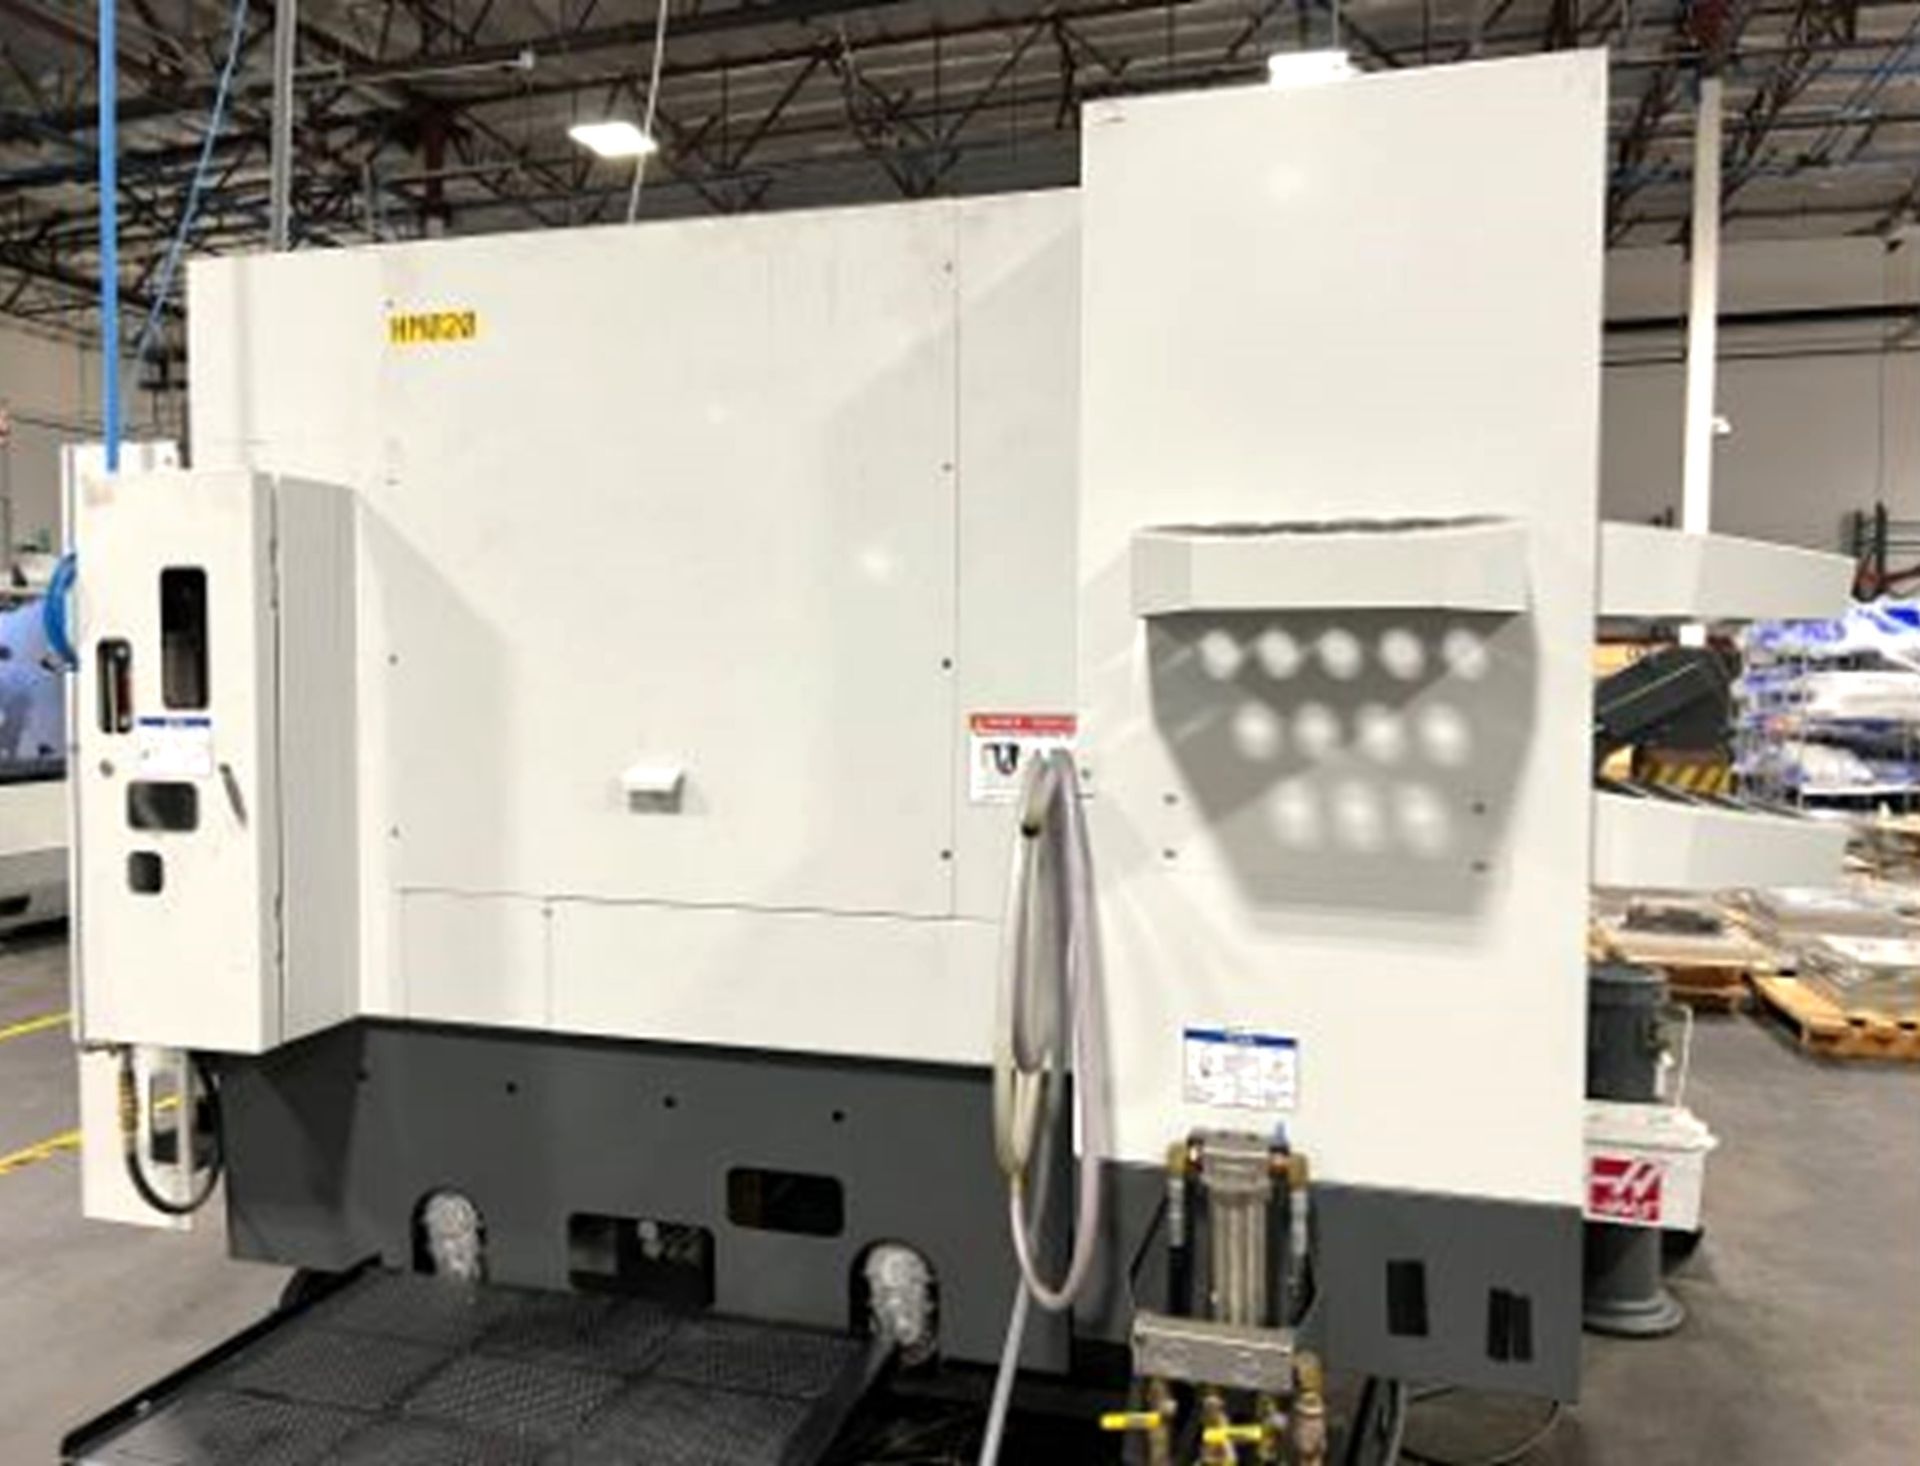 HAAS EC-500 4-AXIS CNC HORIZONTAL MACHINING CENTER, S/N 2054671, NEW 2015 - Image 7 of 9